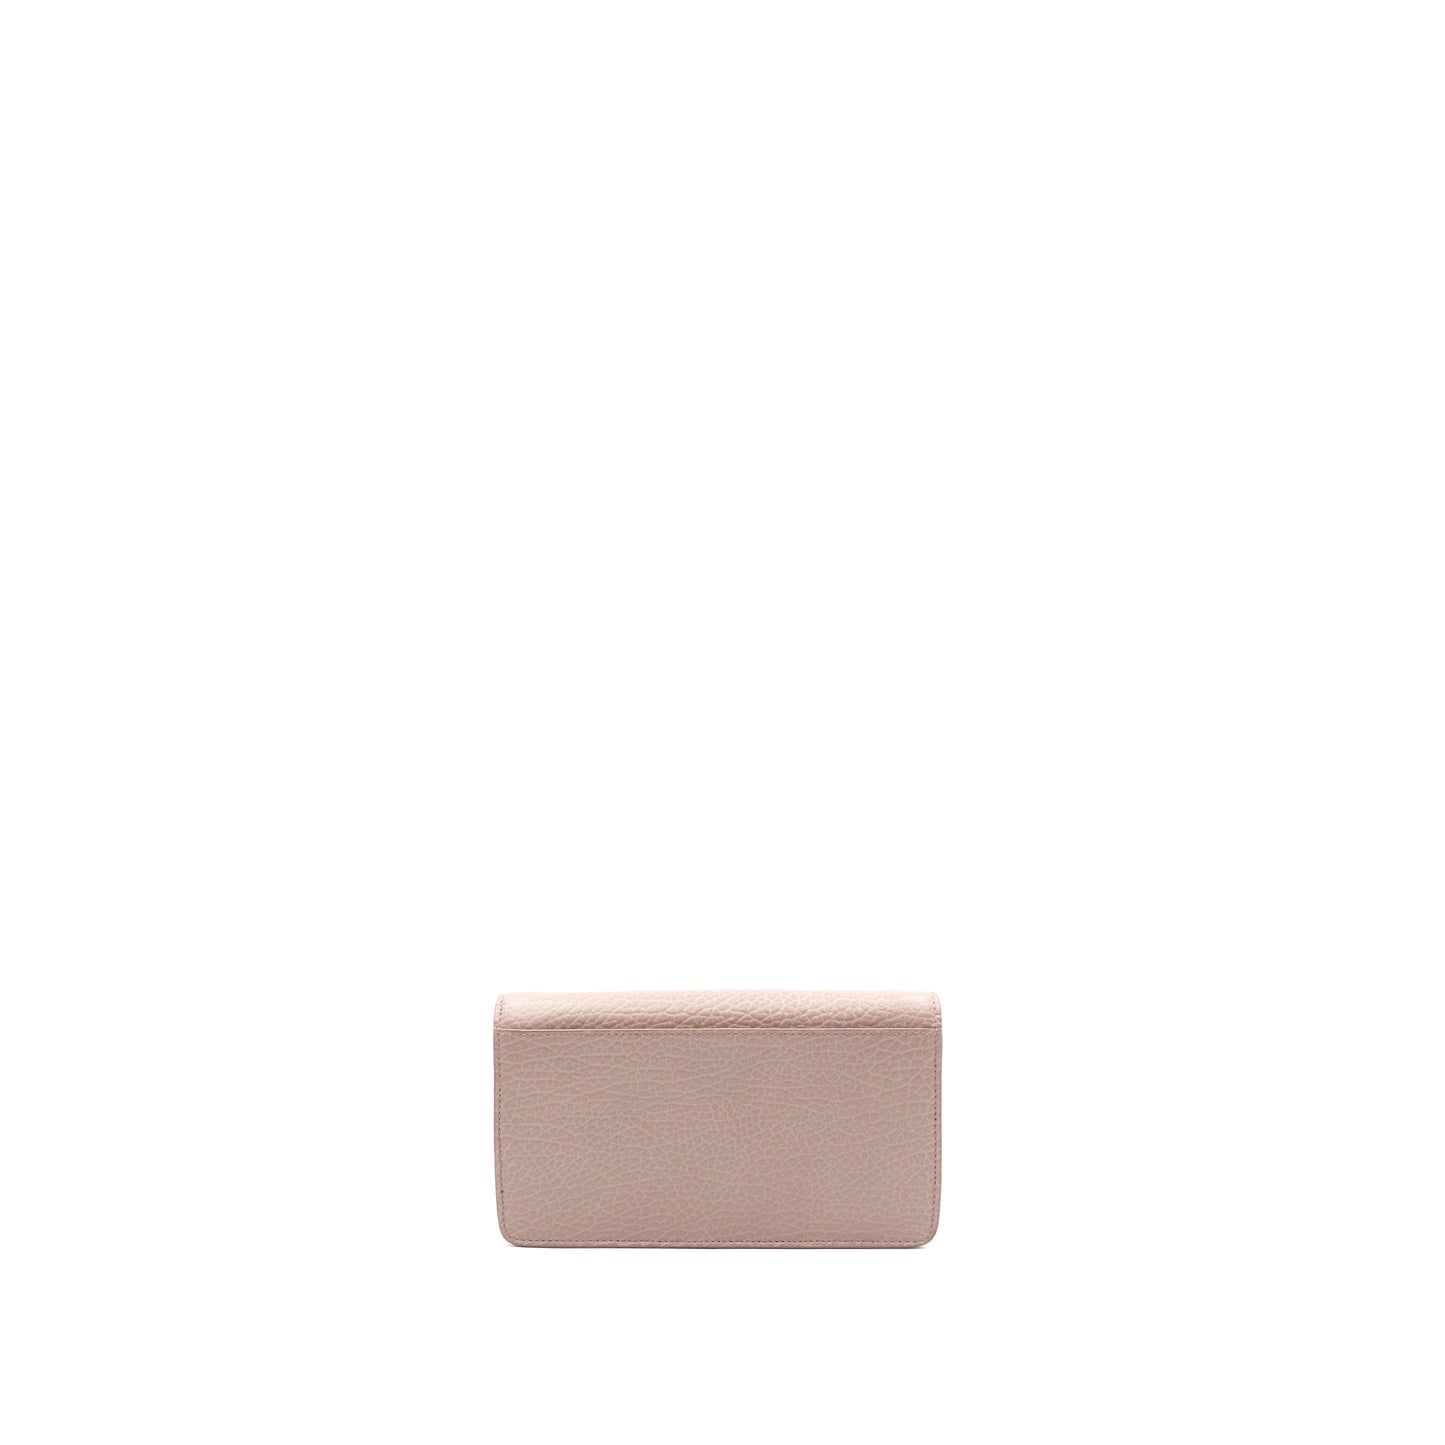 Four Stitch Wallet On Chain Clutch Bag in Mauve